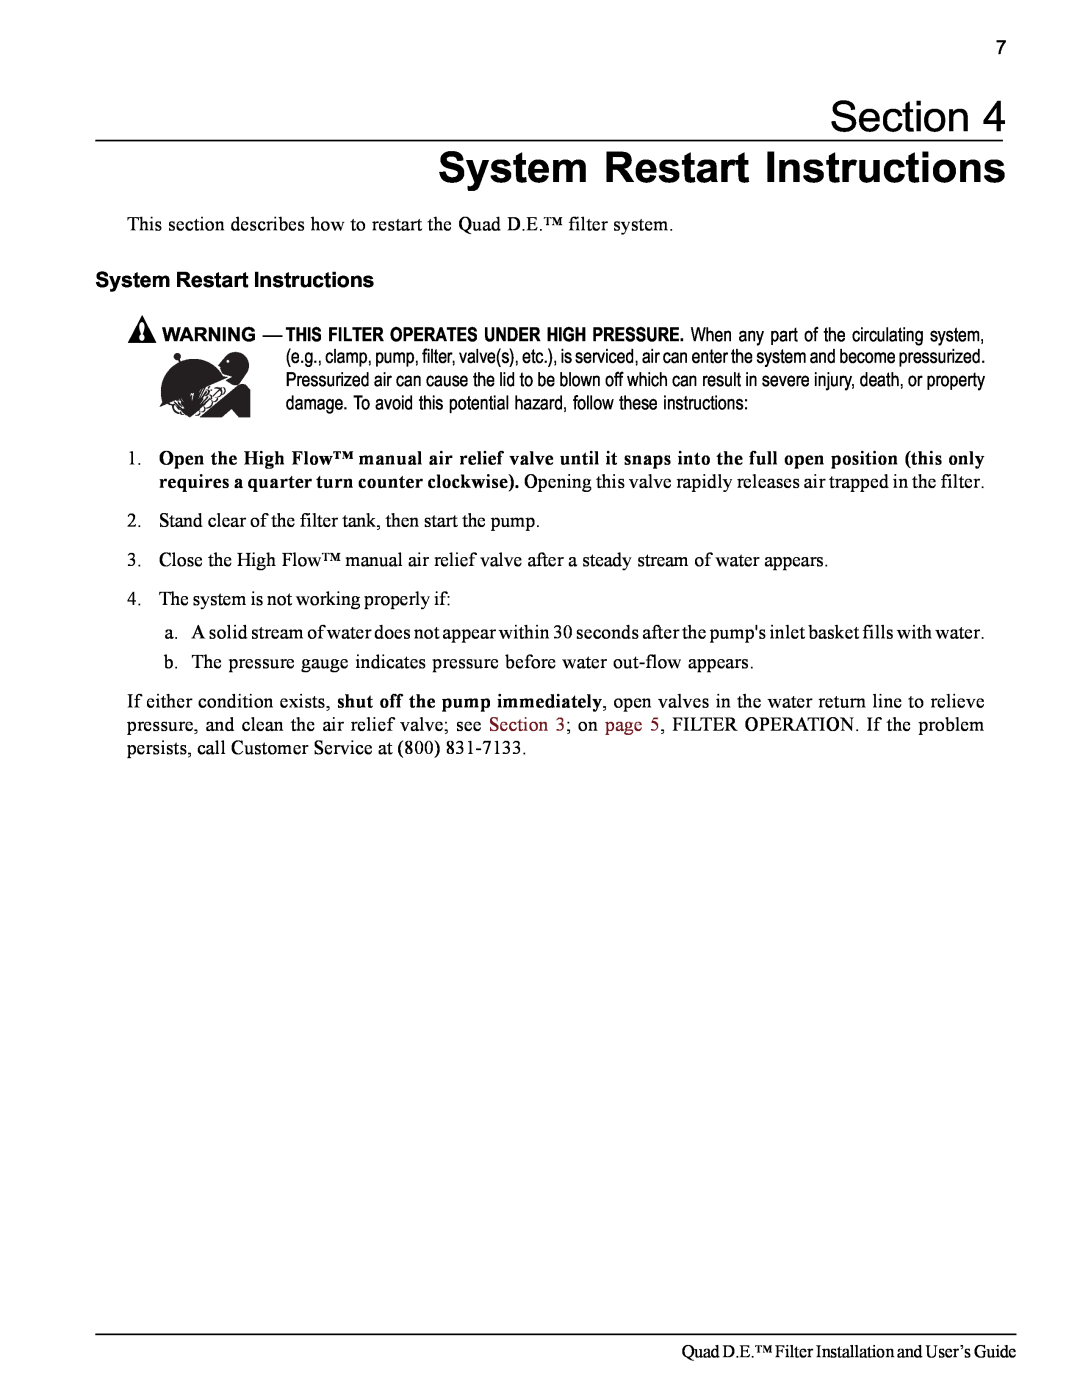 Pentair D.E. Cartridge Style Filter important safety instructions Section System Restart Instructions 